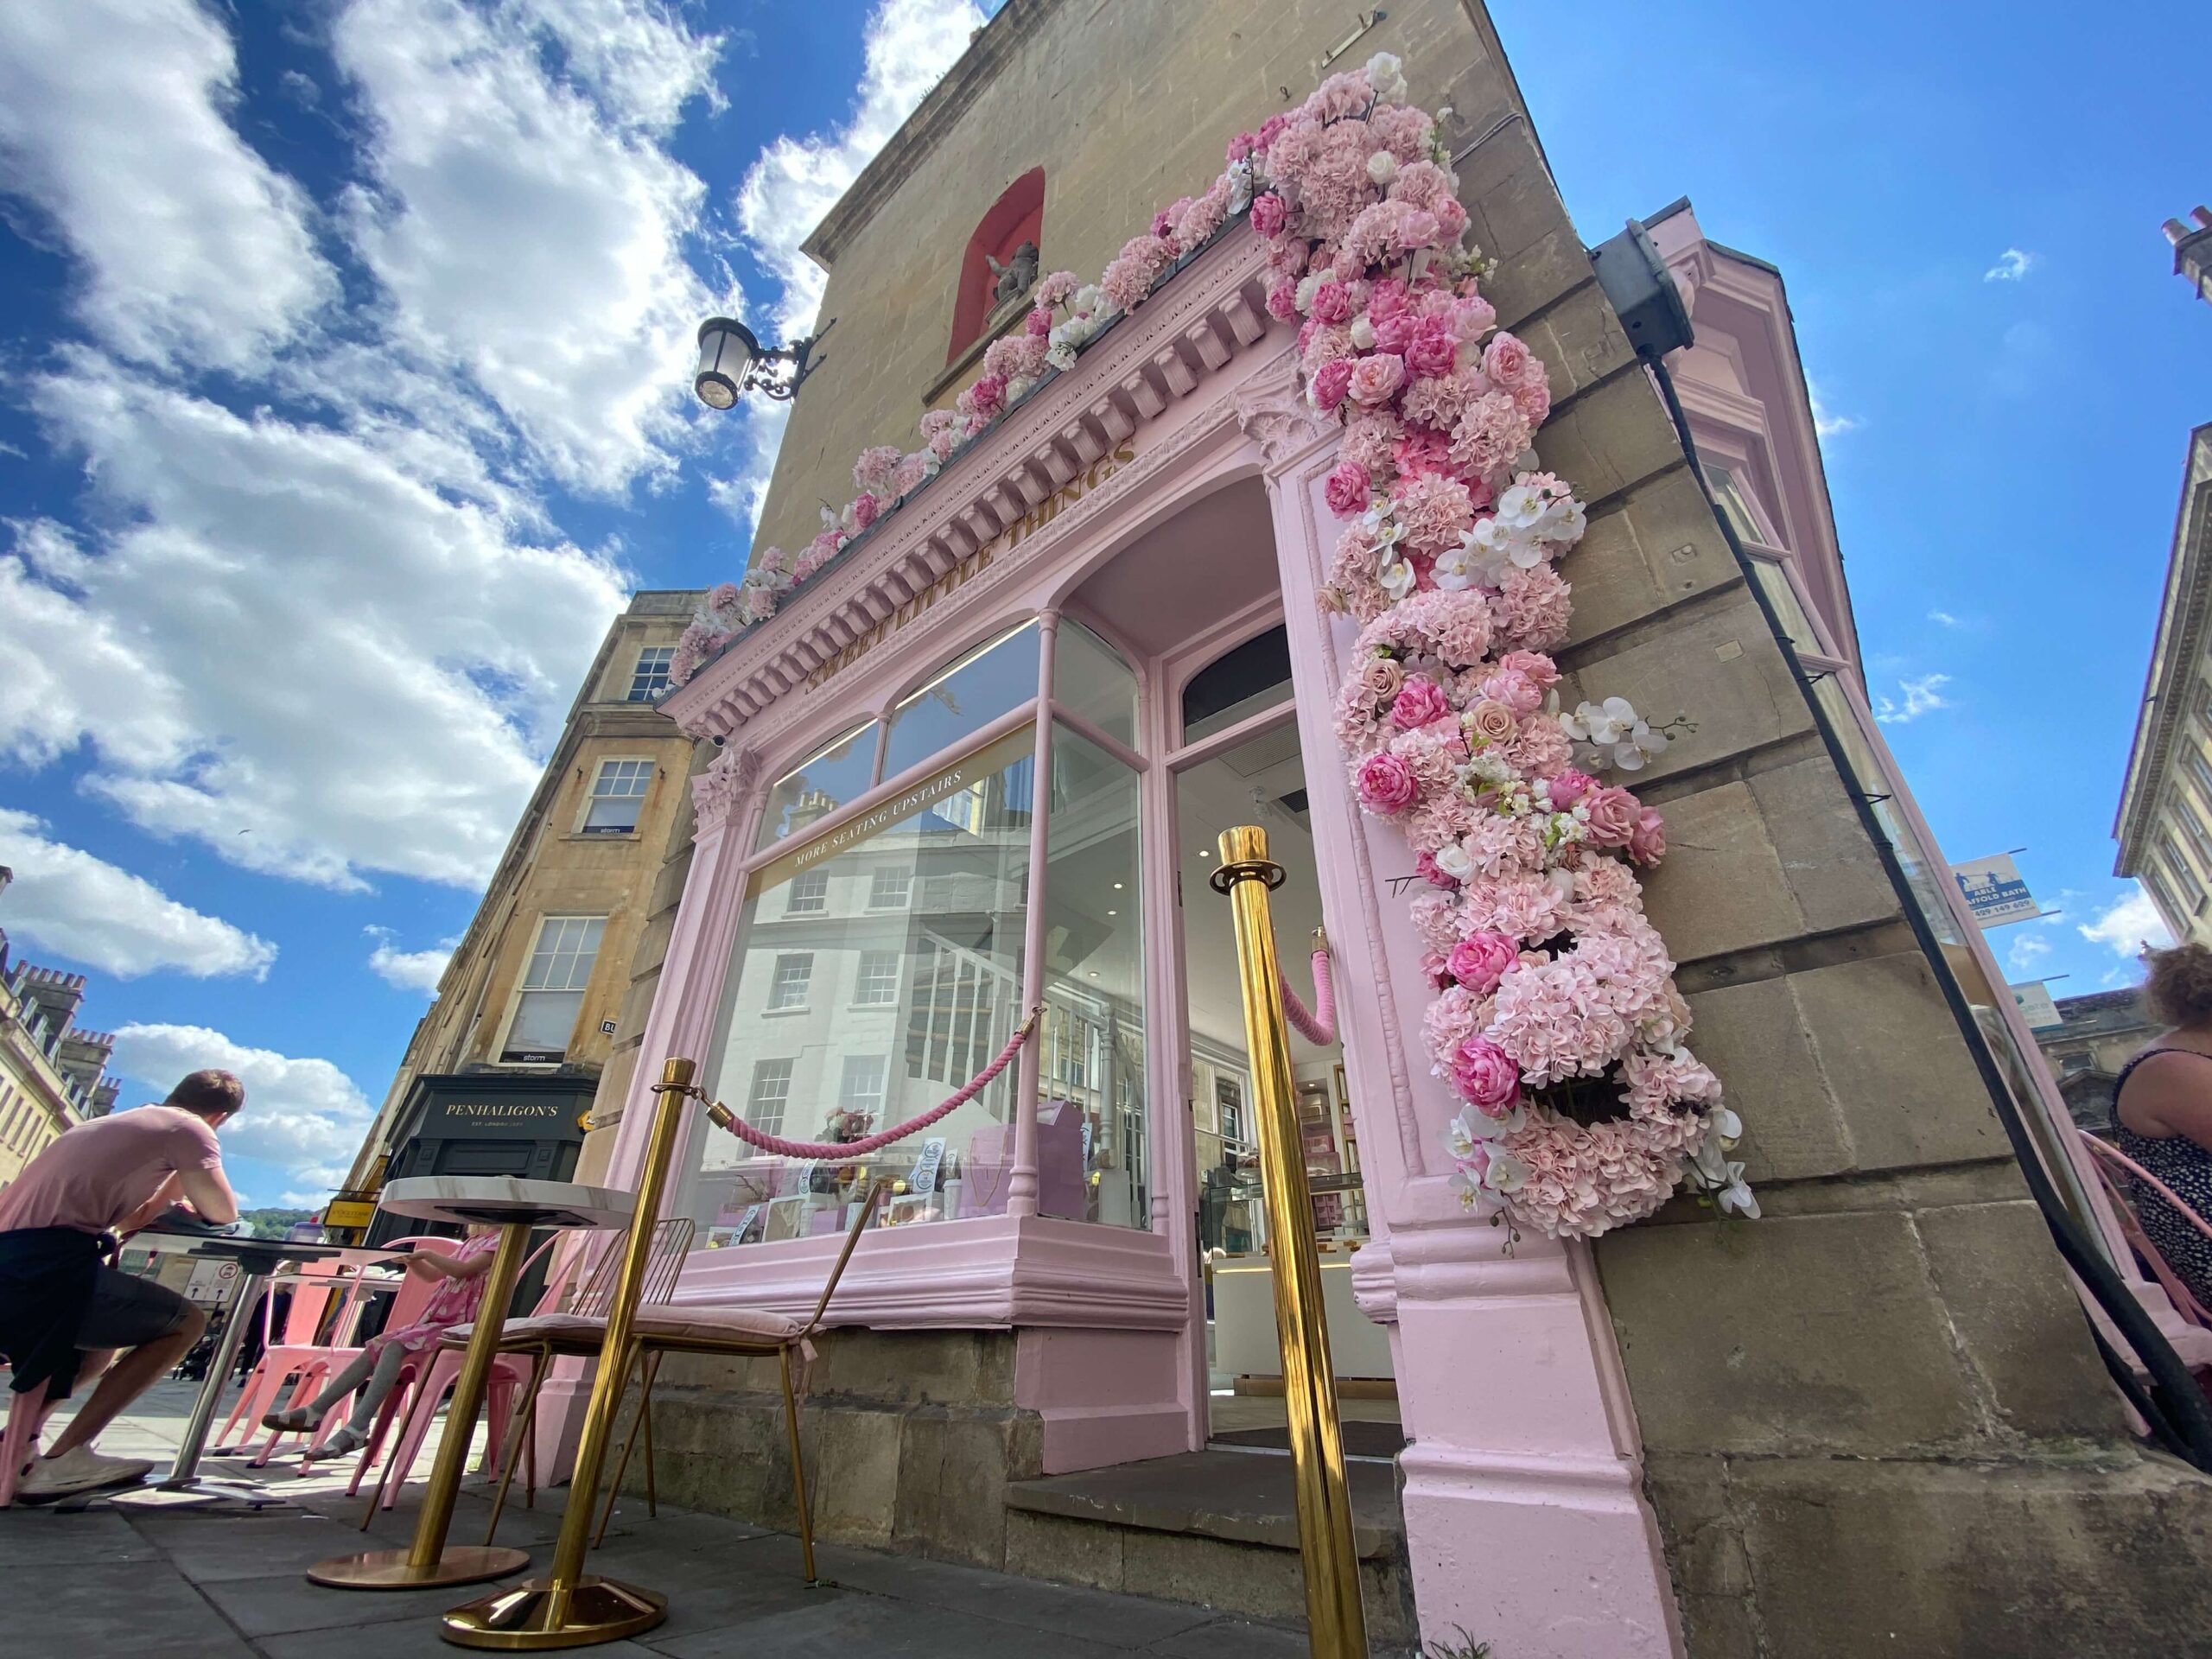 Sweet Little Things - Tea Room and Bakery featuring Afternoon tea in a beautiful pink tea room